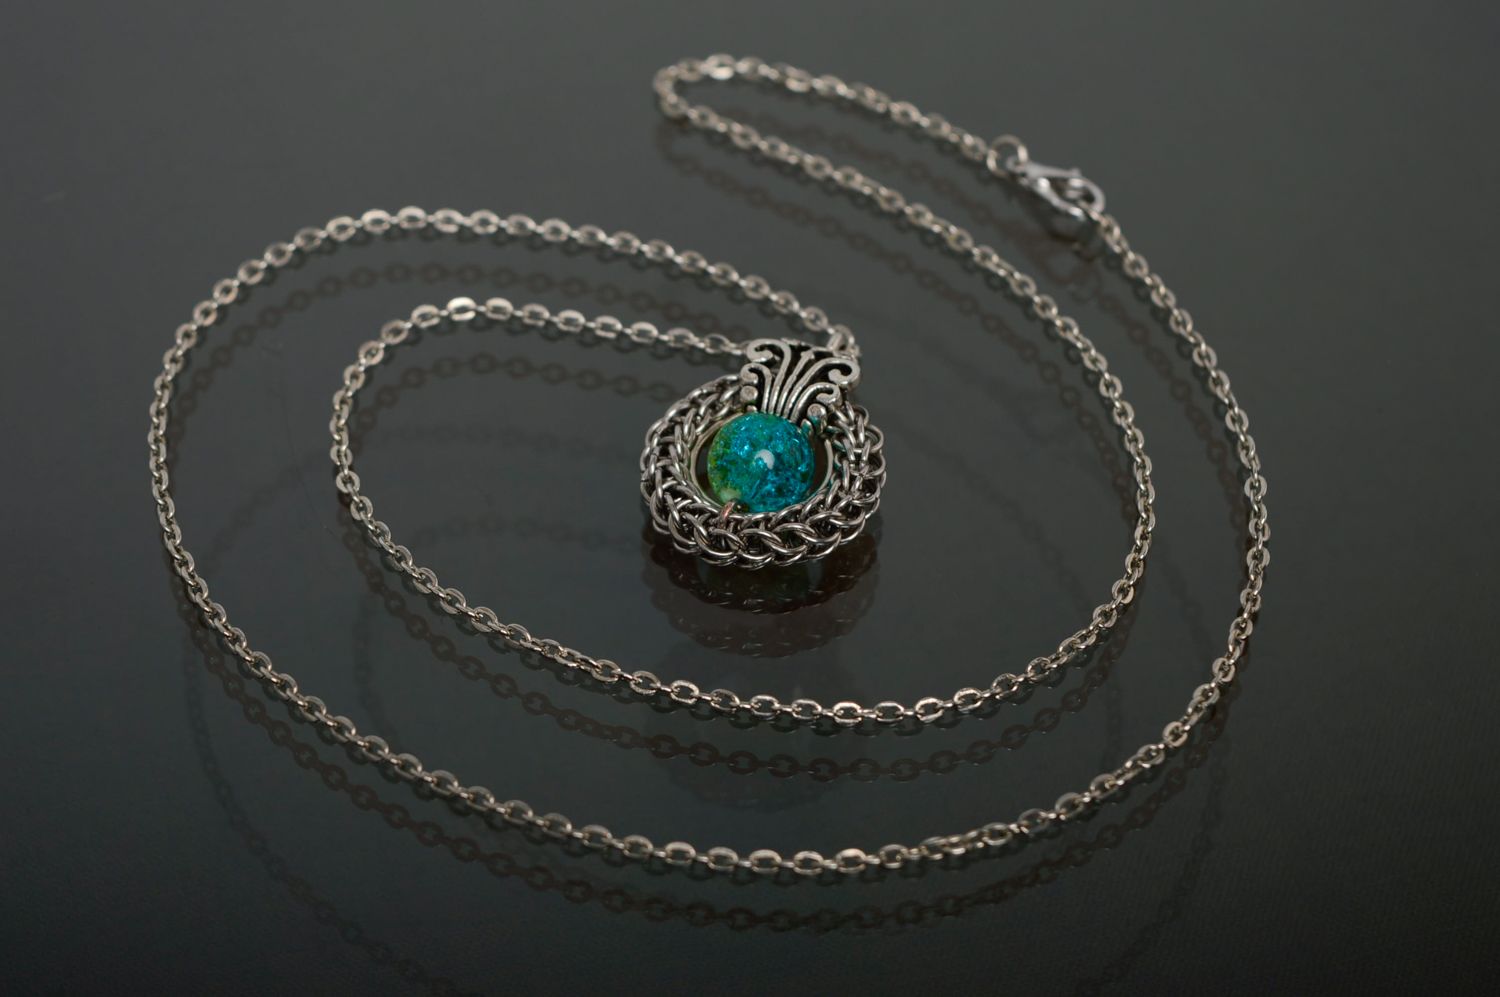 Steel pendant with Czech bead made using chain armor weaving technique photo 2